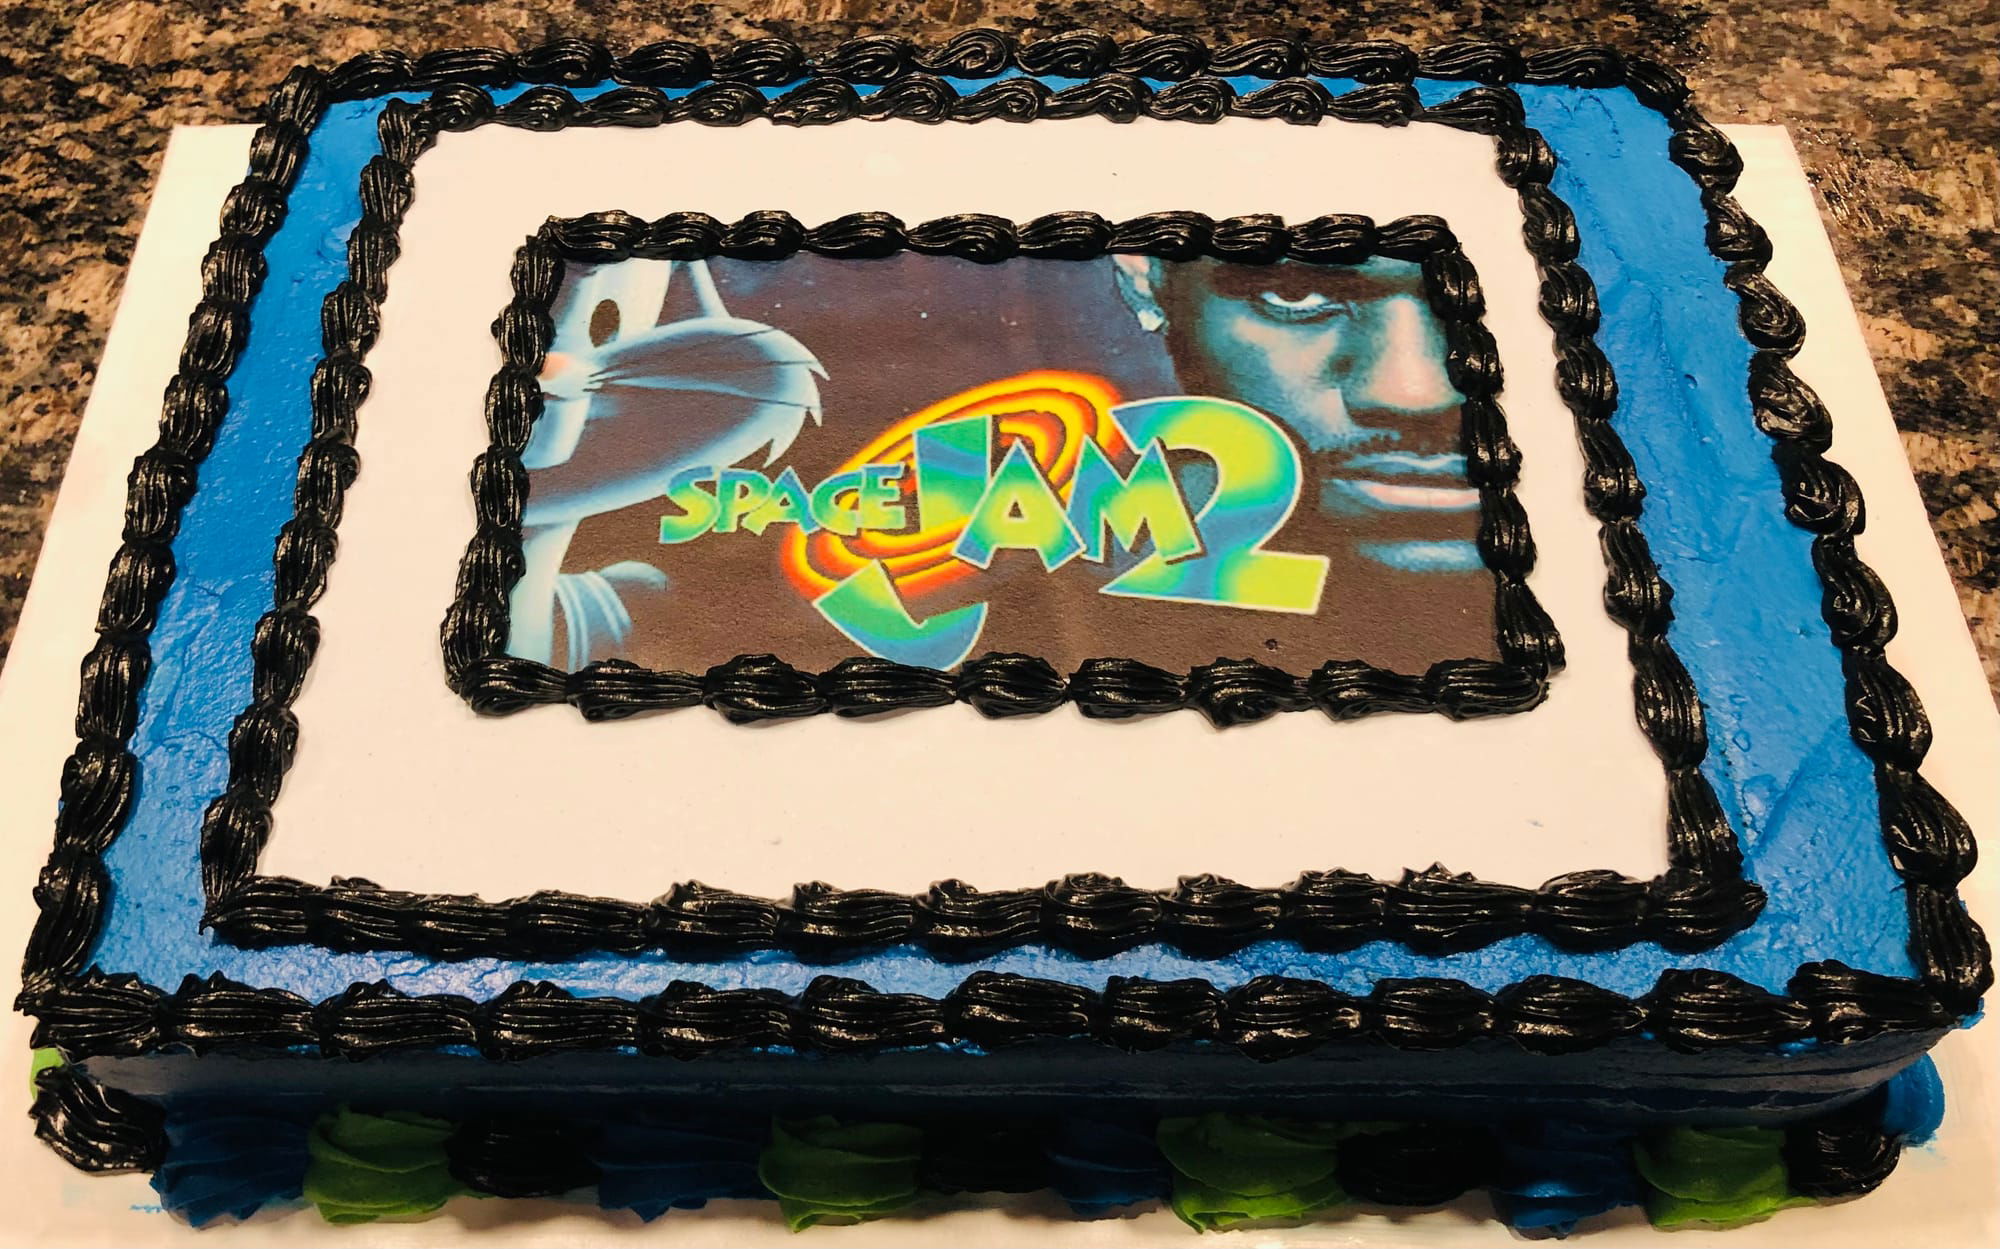 Space Jam 2 Vanilla Sheet Cake With Buttercream Frosting